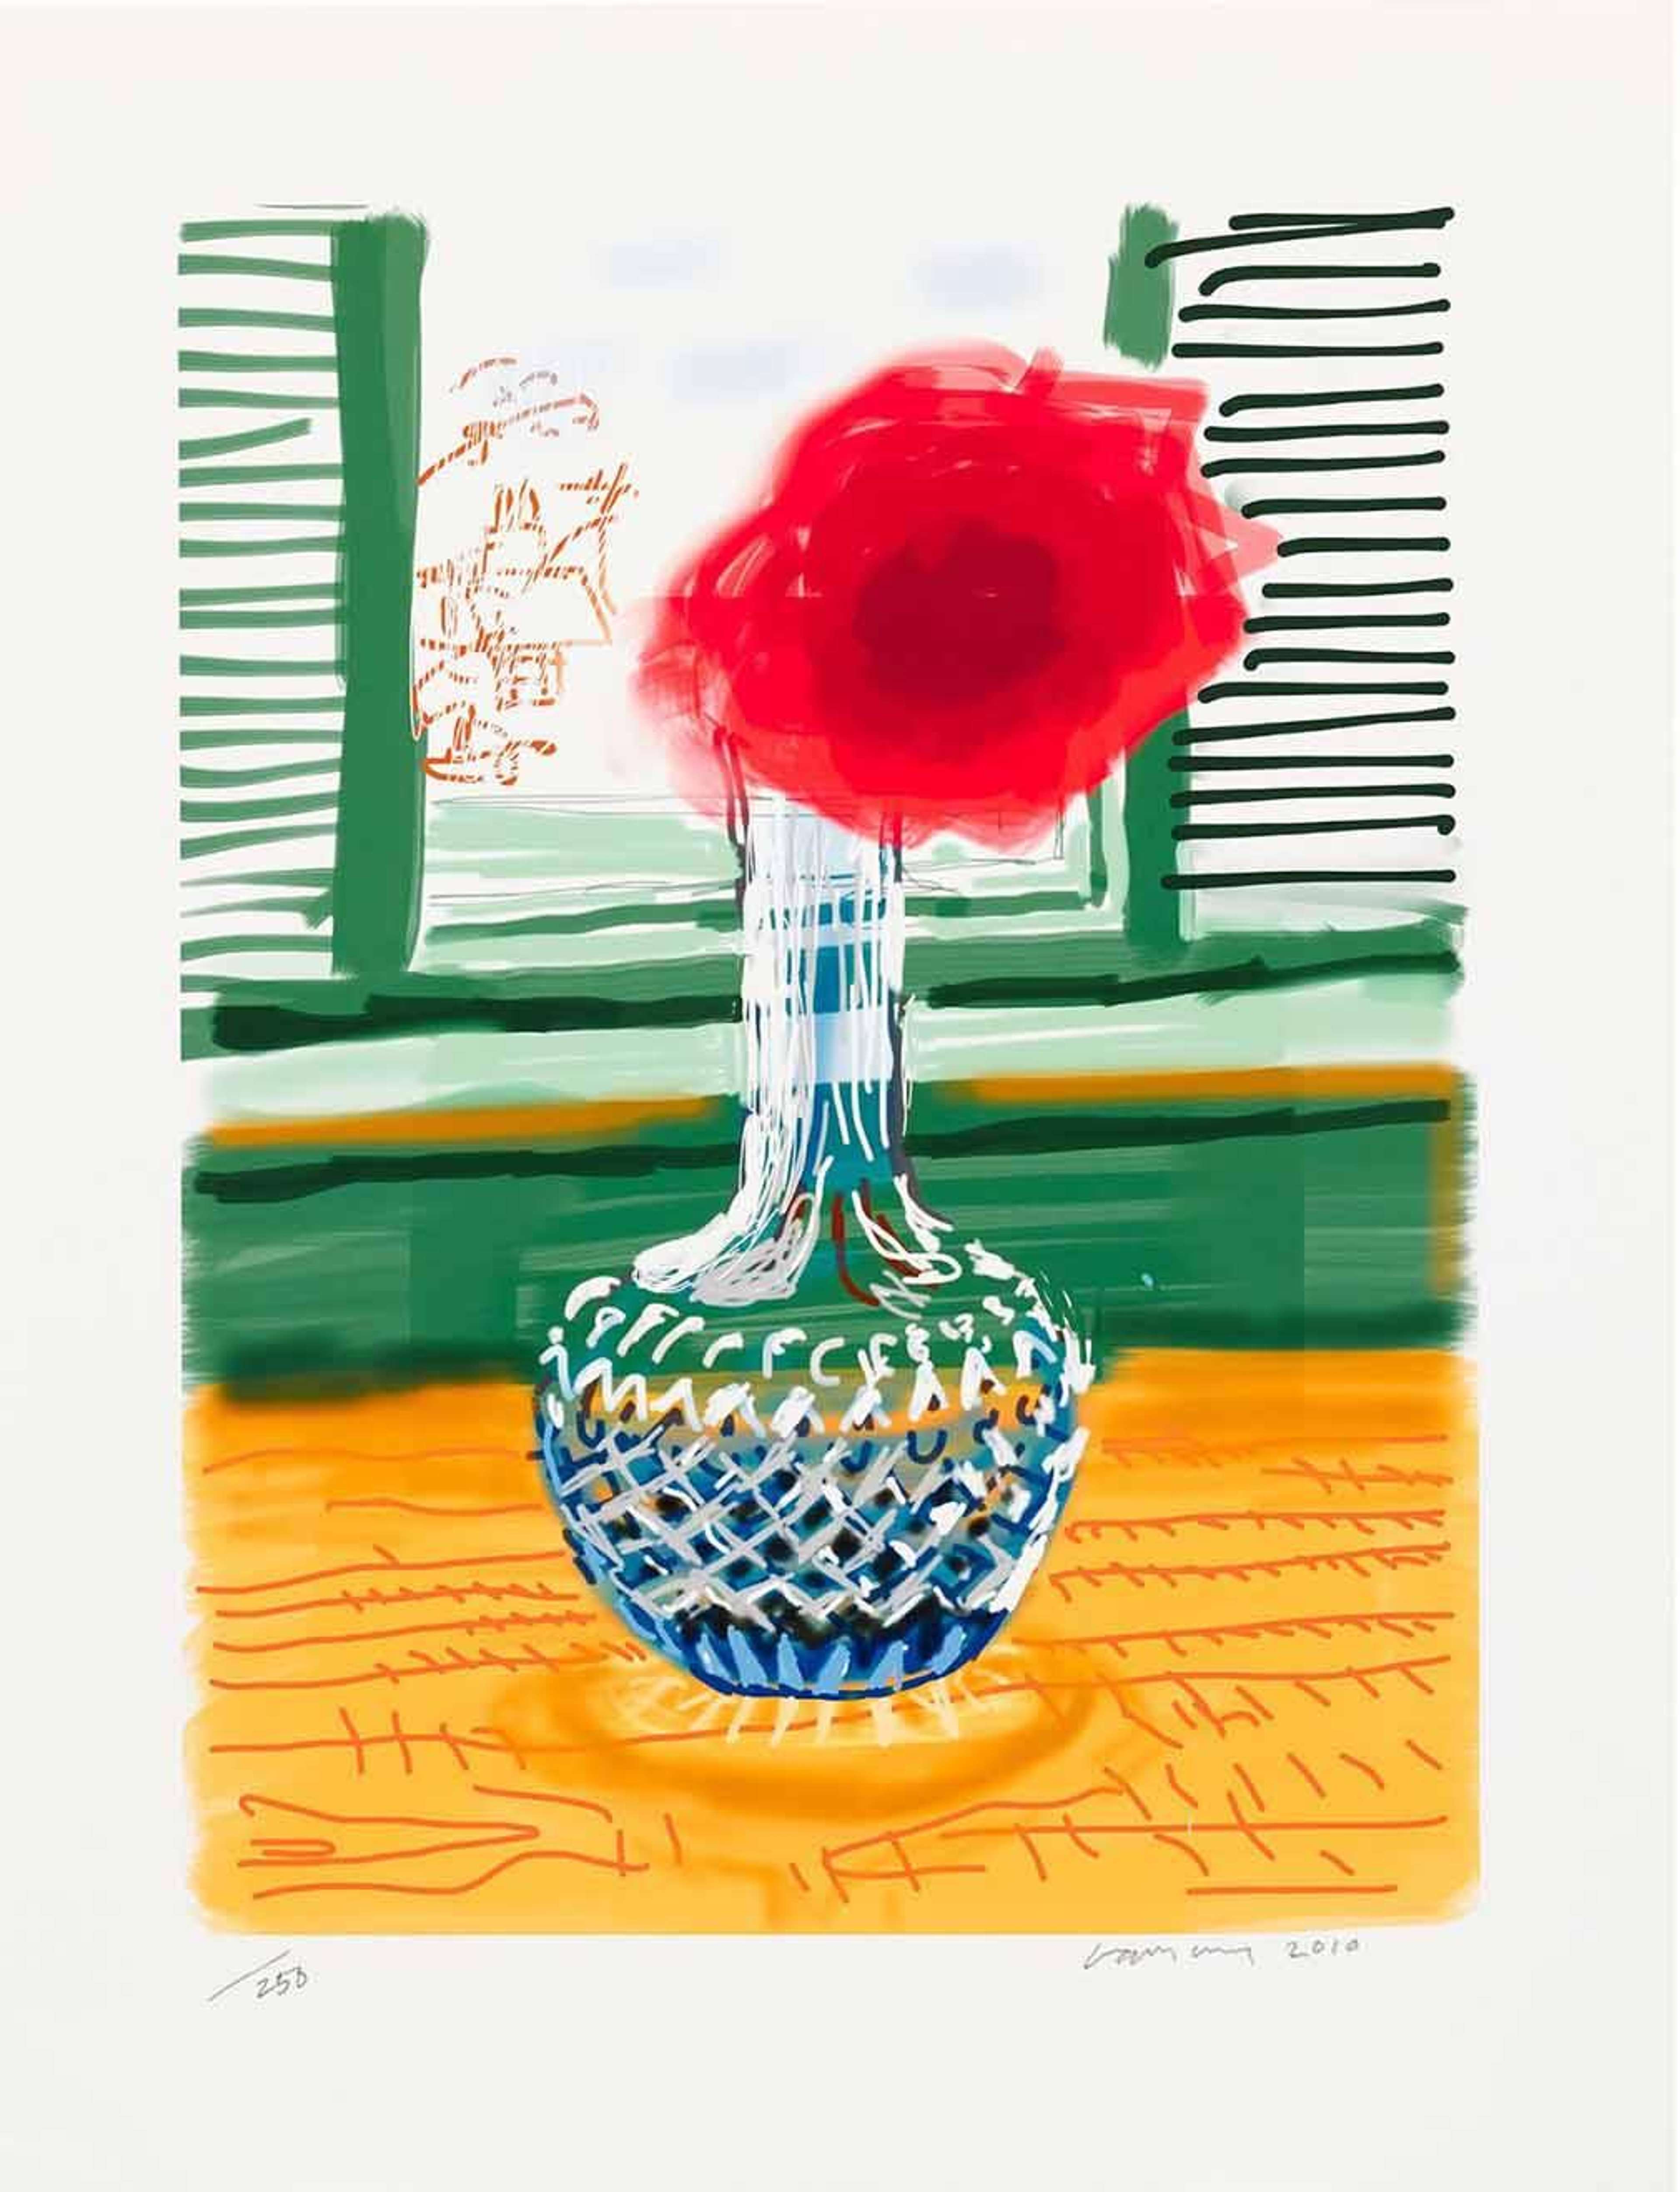 David Hockney’s Untitled No. 281. A digital print of a single red flower in a glass vase in front of an open window with green shutters.